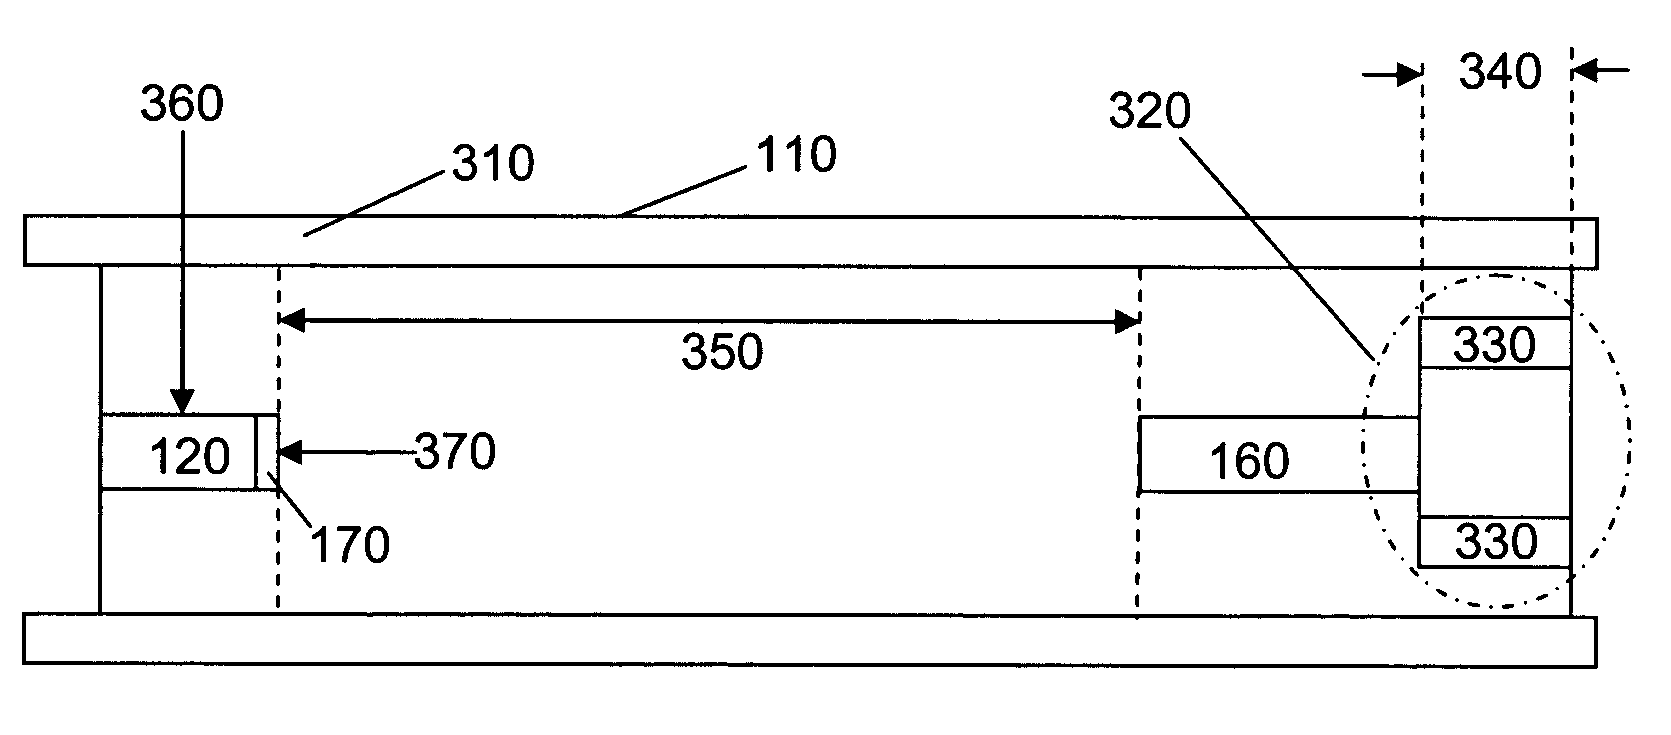 Temperature compensated time-of-flight mass spectrometer